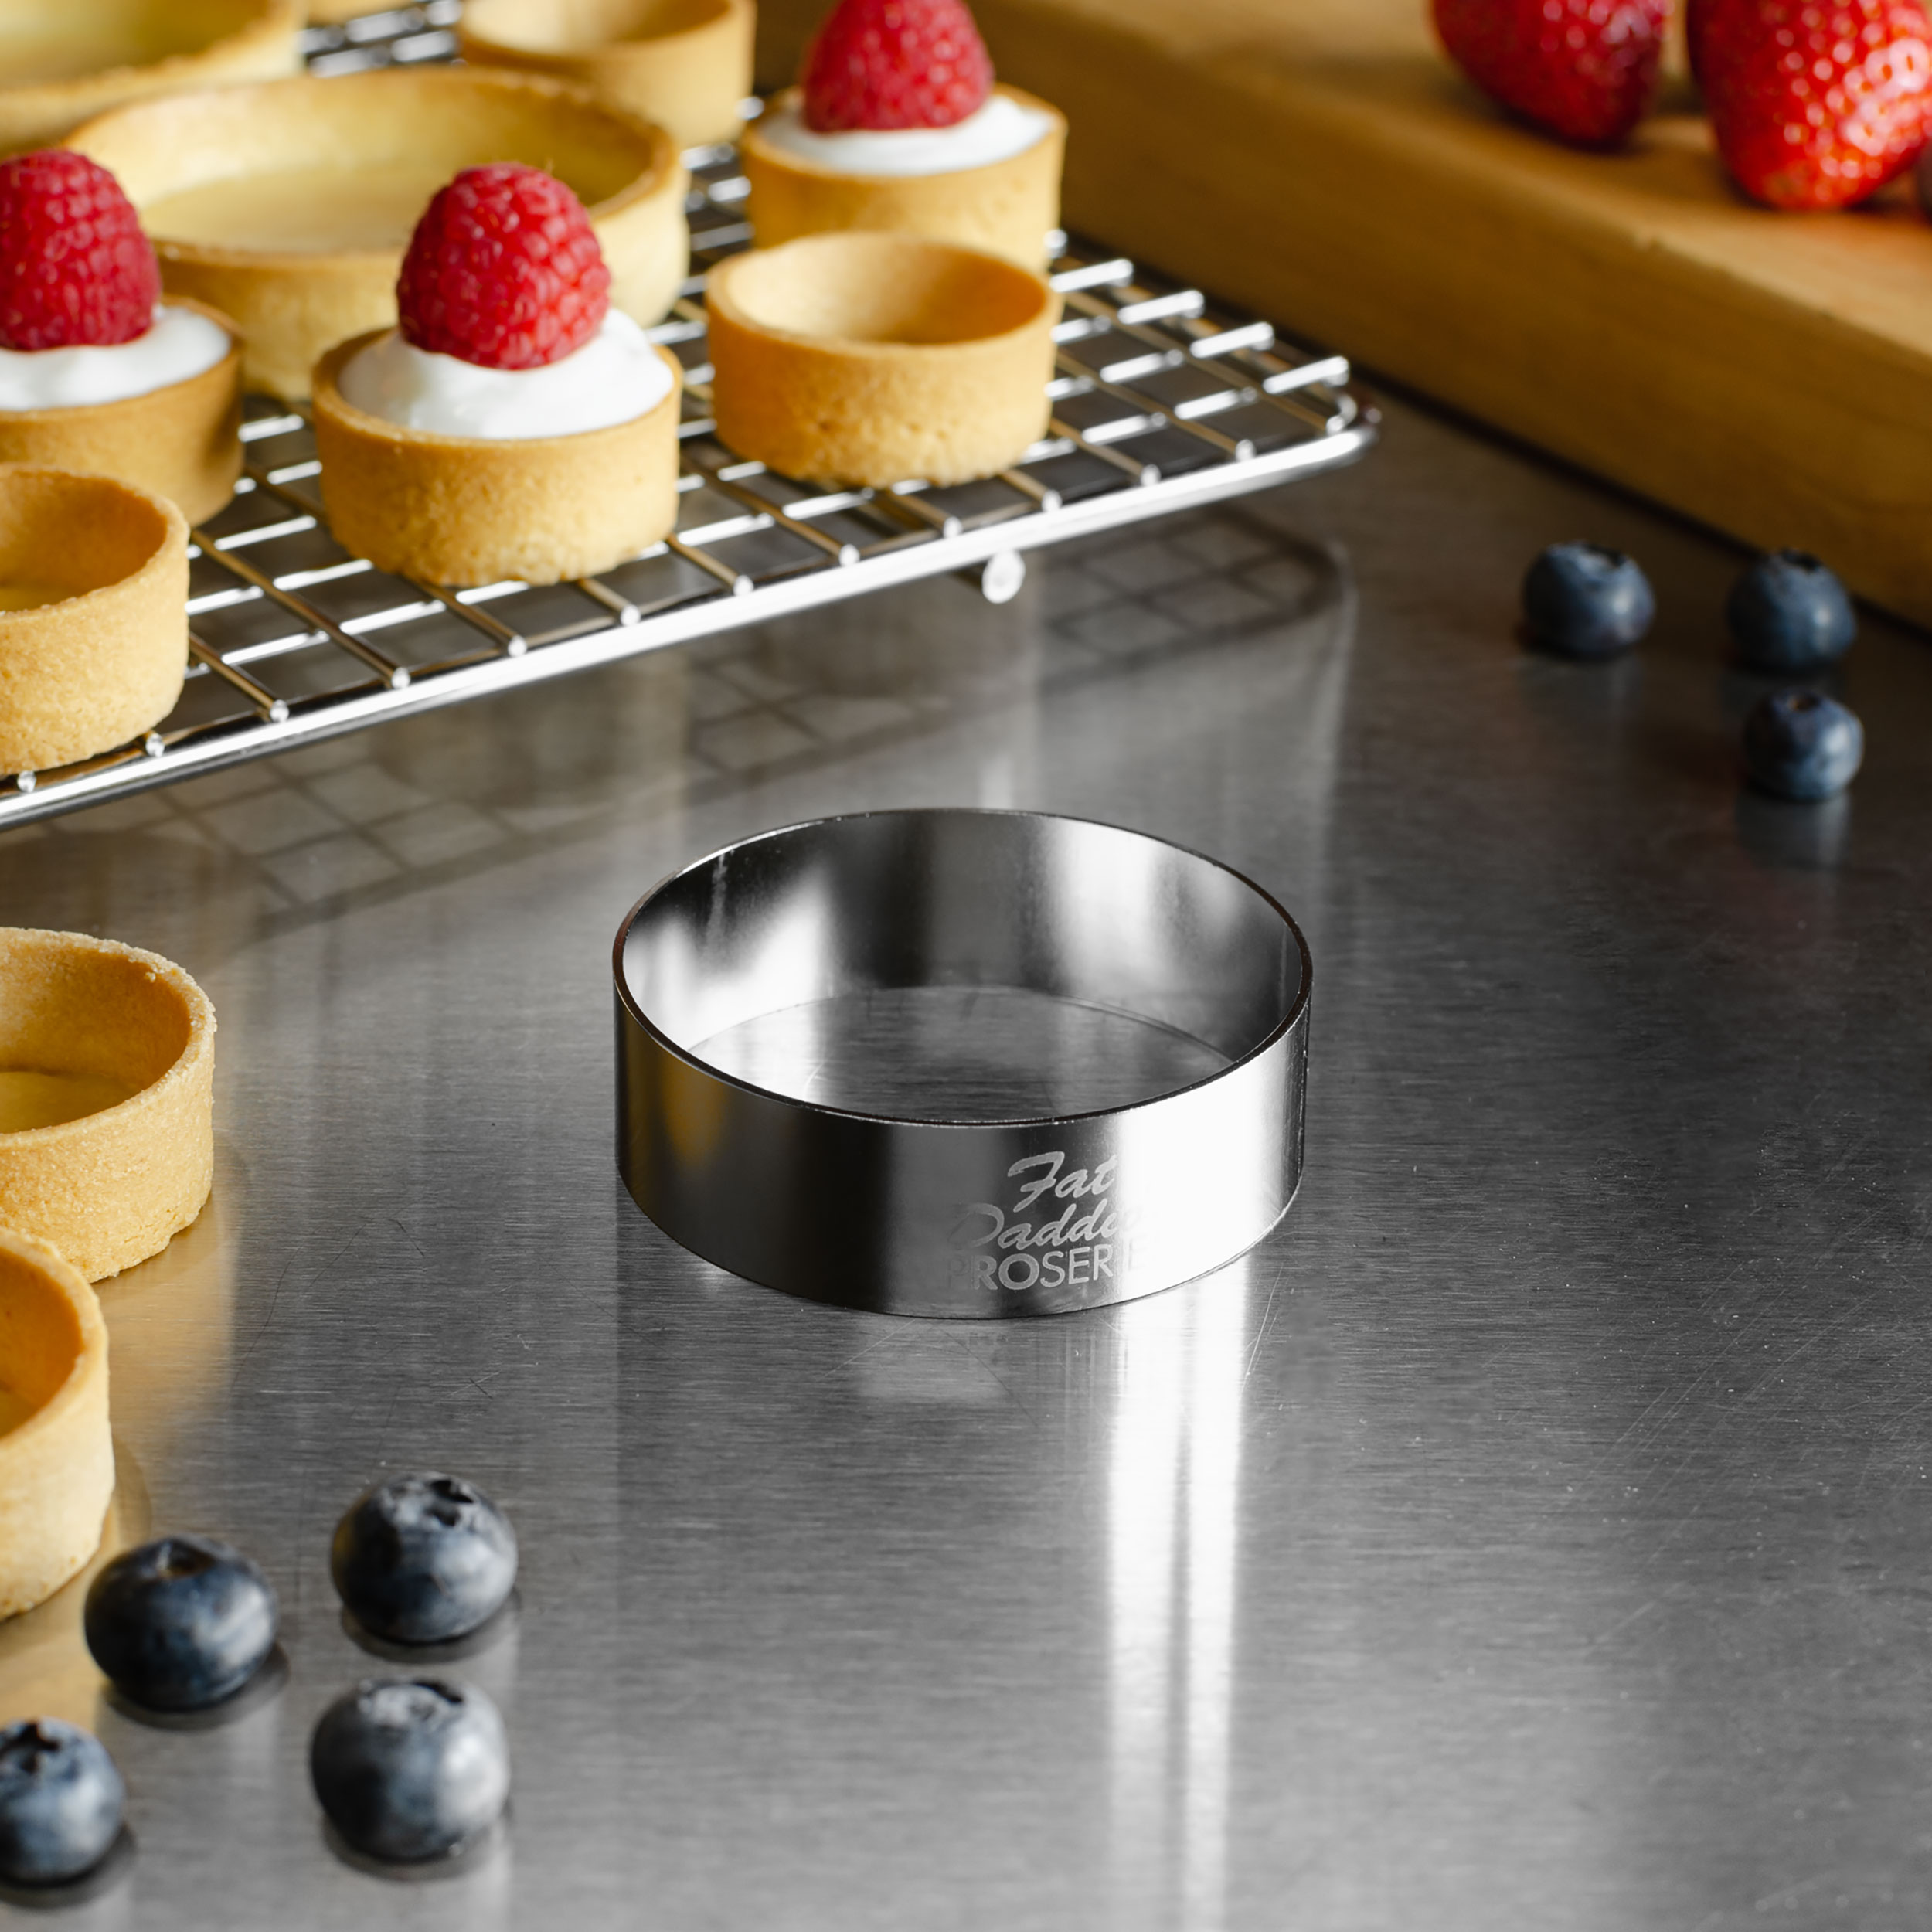 3 Inch x 2 Inch Fat Daddios Stainless Steel Round Cake and Pastry Ring 